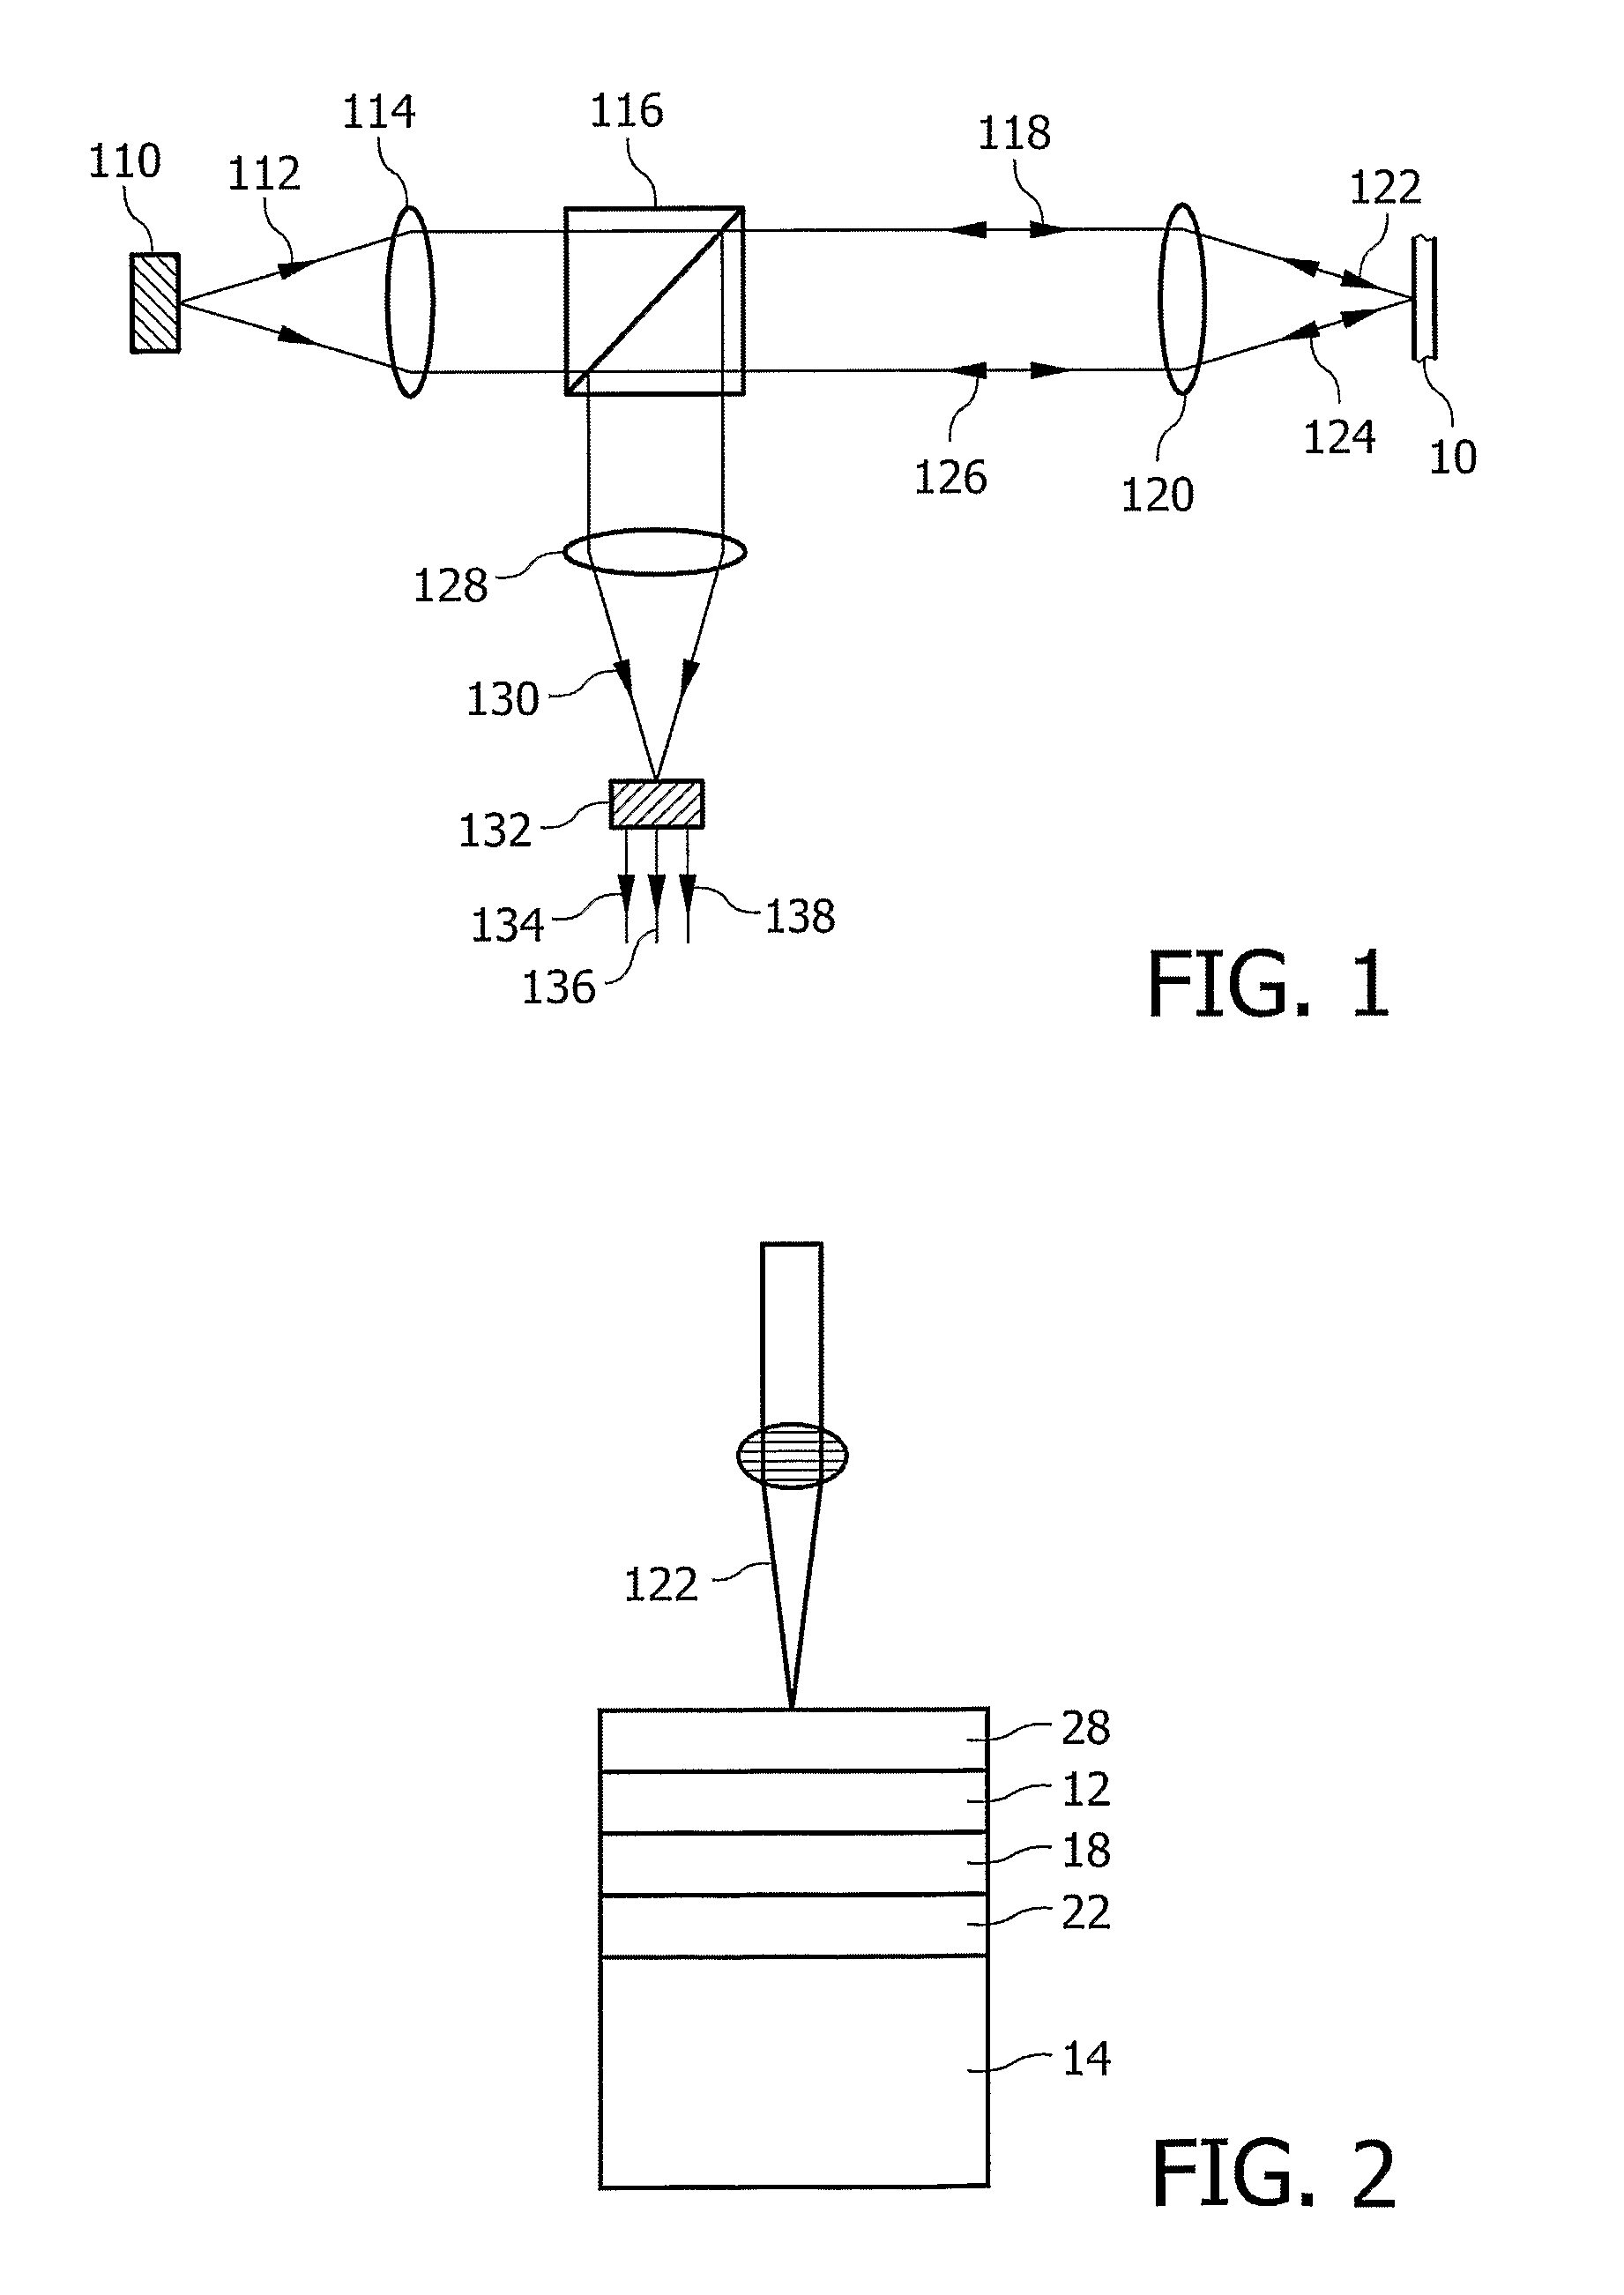 Method Of Writing Data On A Master Substrate For Optical Recording